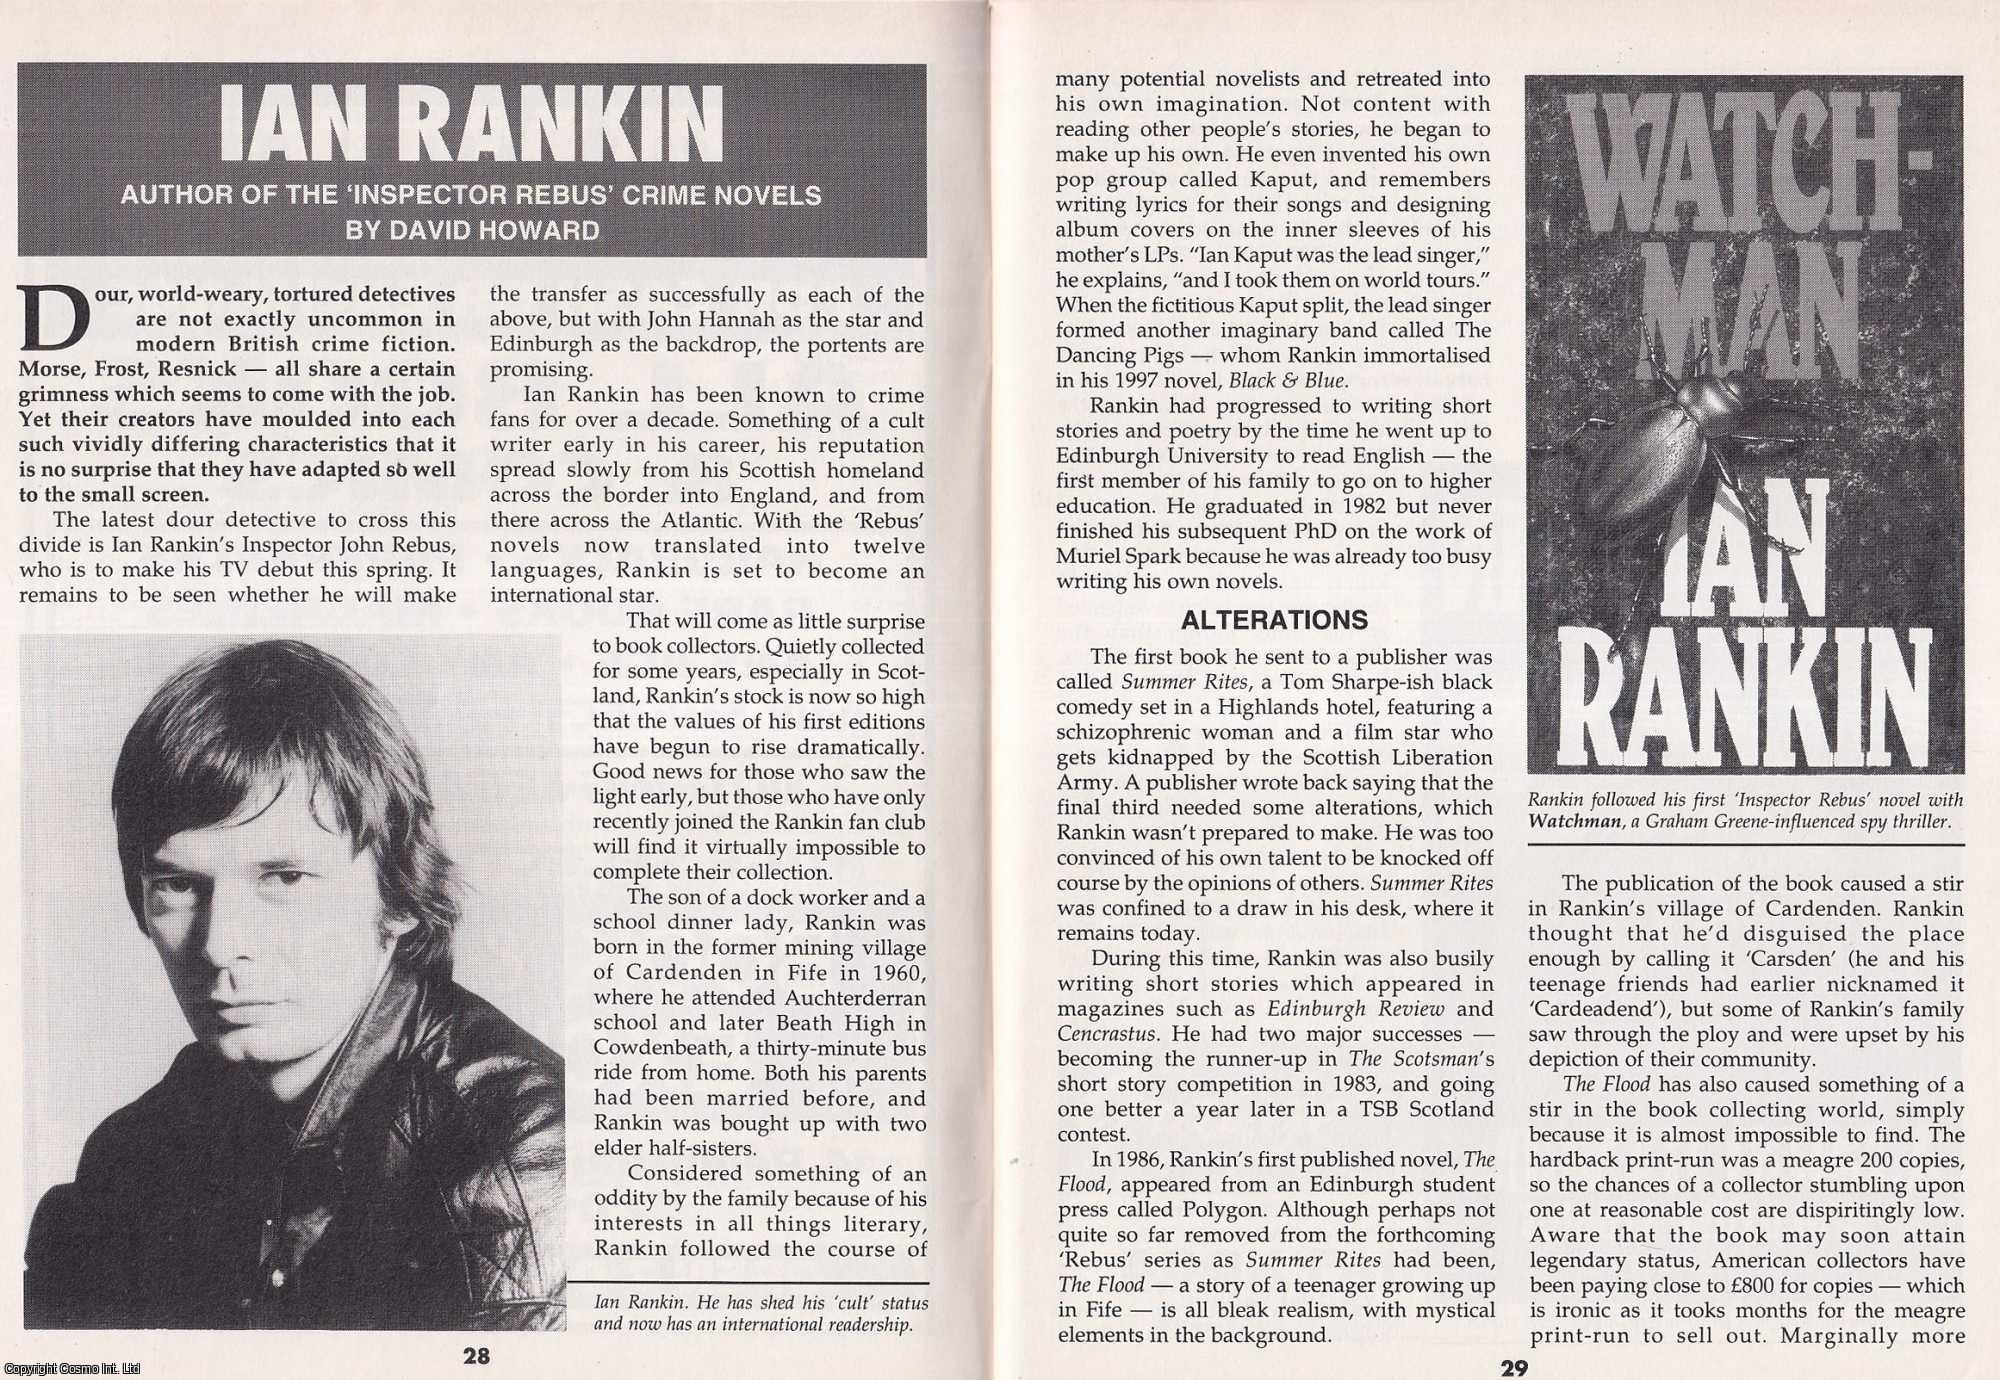 David Howard - Ian Rankin : The Inspector Rebus Crime Novels. This is an original article separated from an issue of The Book & Magazine Collector publication, 2000.